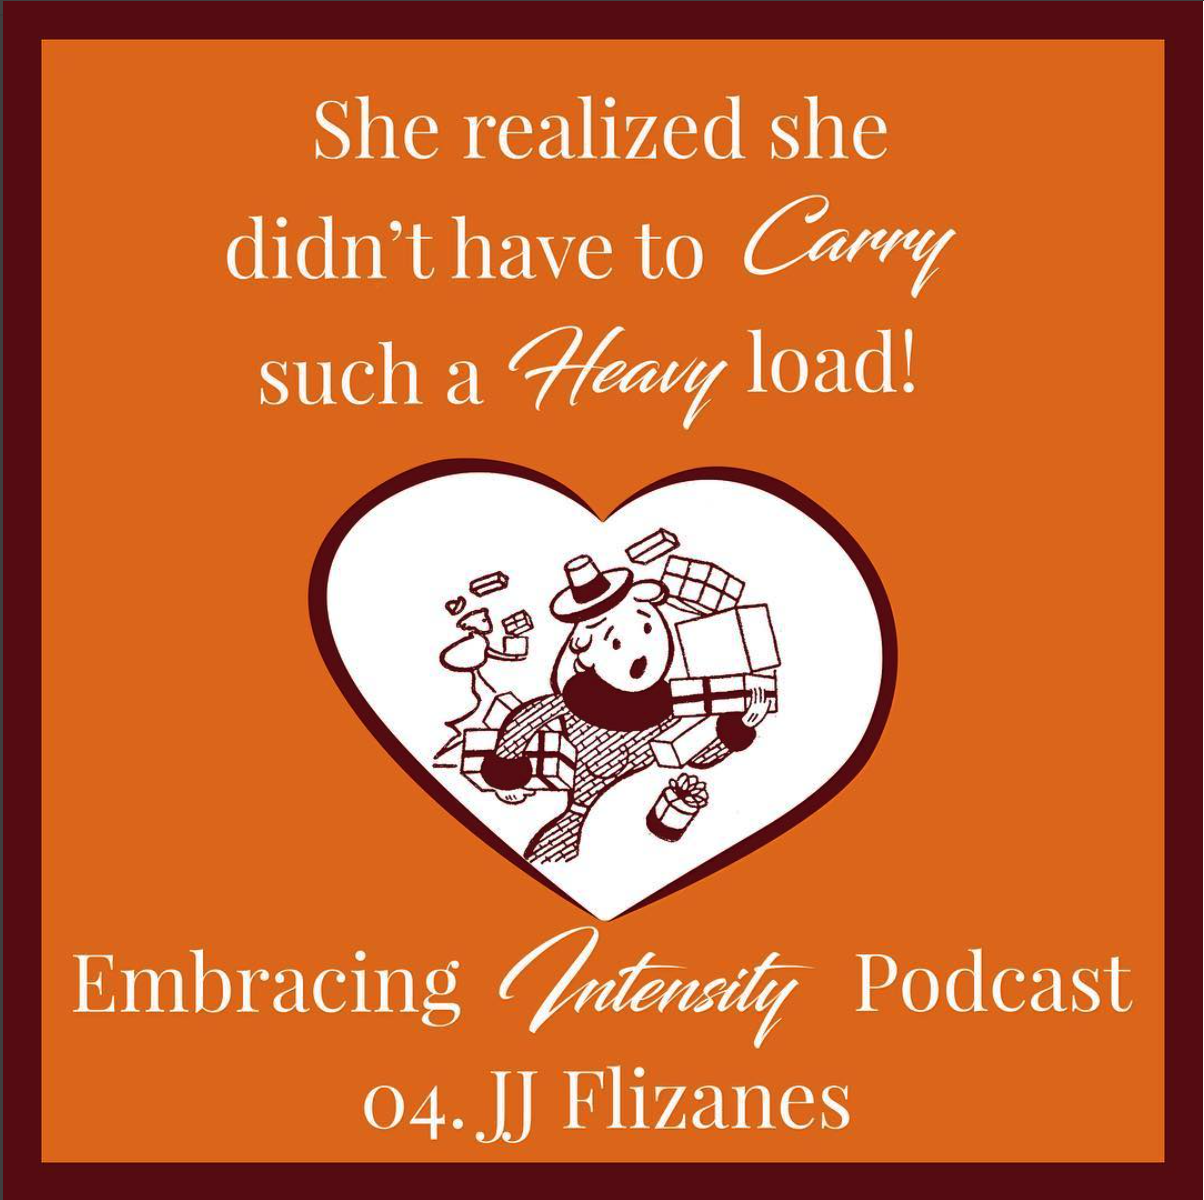 She realized she didn't have to carry such a heavy load! ~ Embracing Intensity Podcast ep. 04: Mastering the Art of Internal Validation with JJ Flizanes